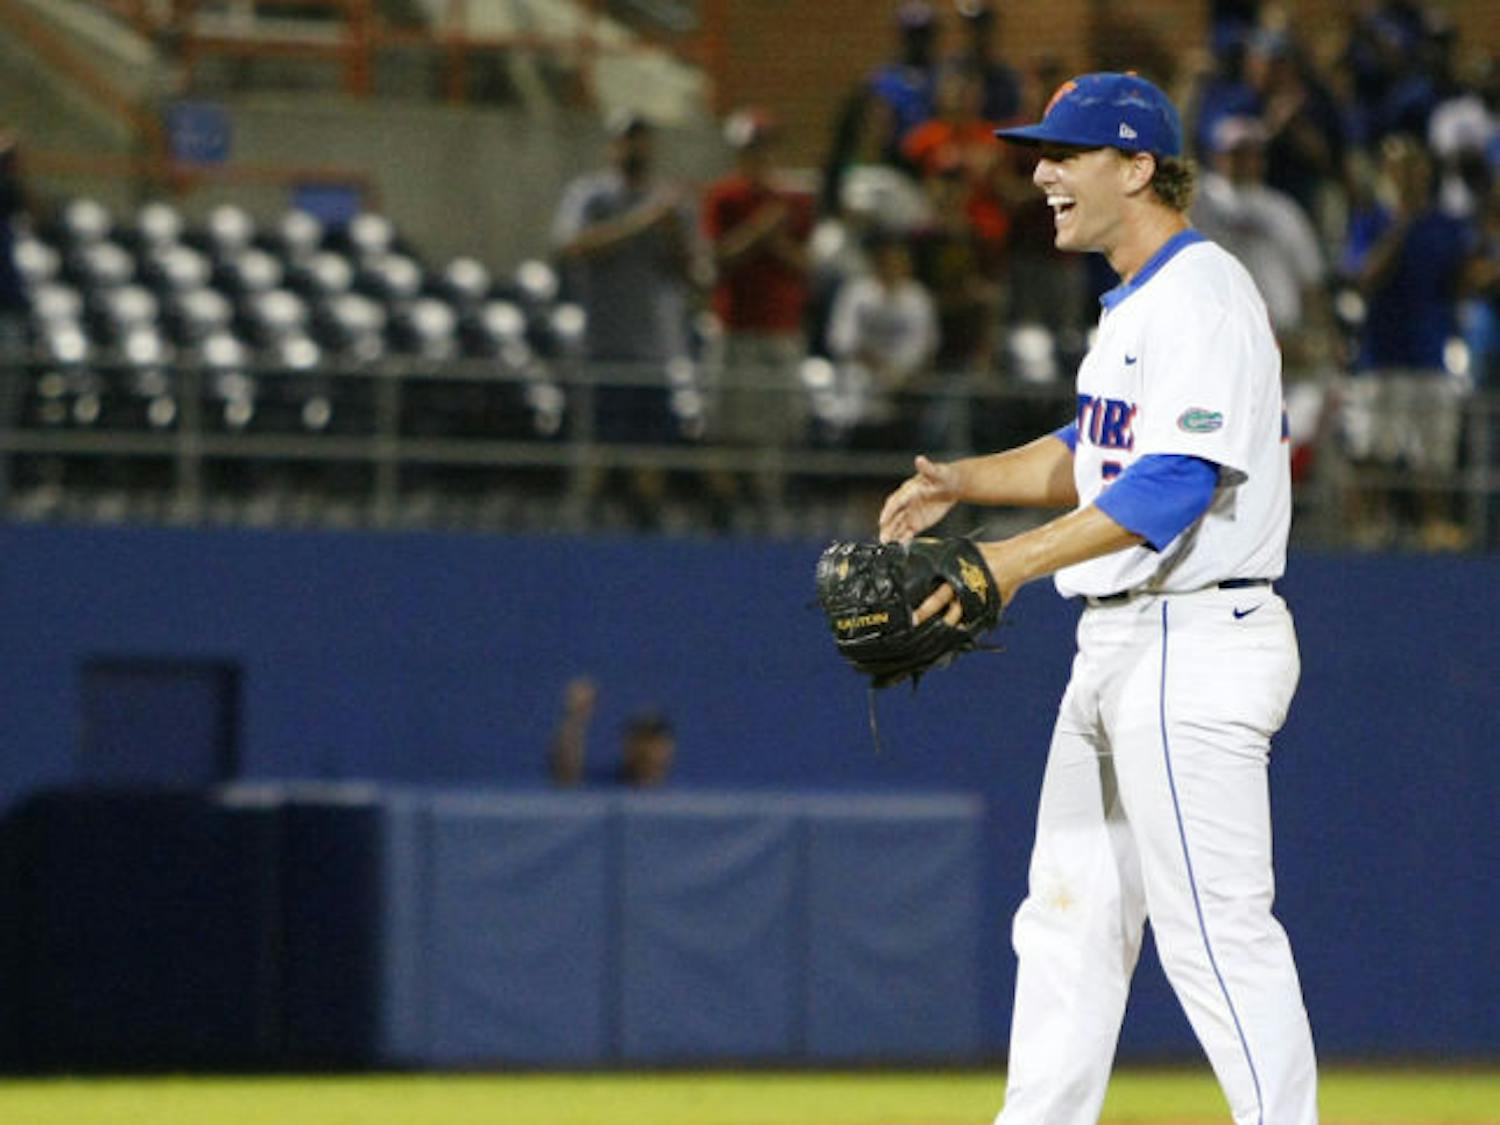 Jonathon Crawford celebrates after pitching a no-hitter against Bethune-Cookman on June 1 at McKethan Stadium.
